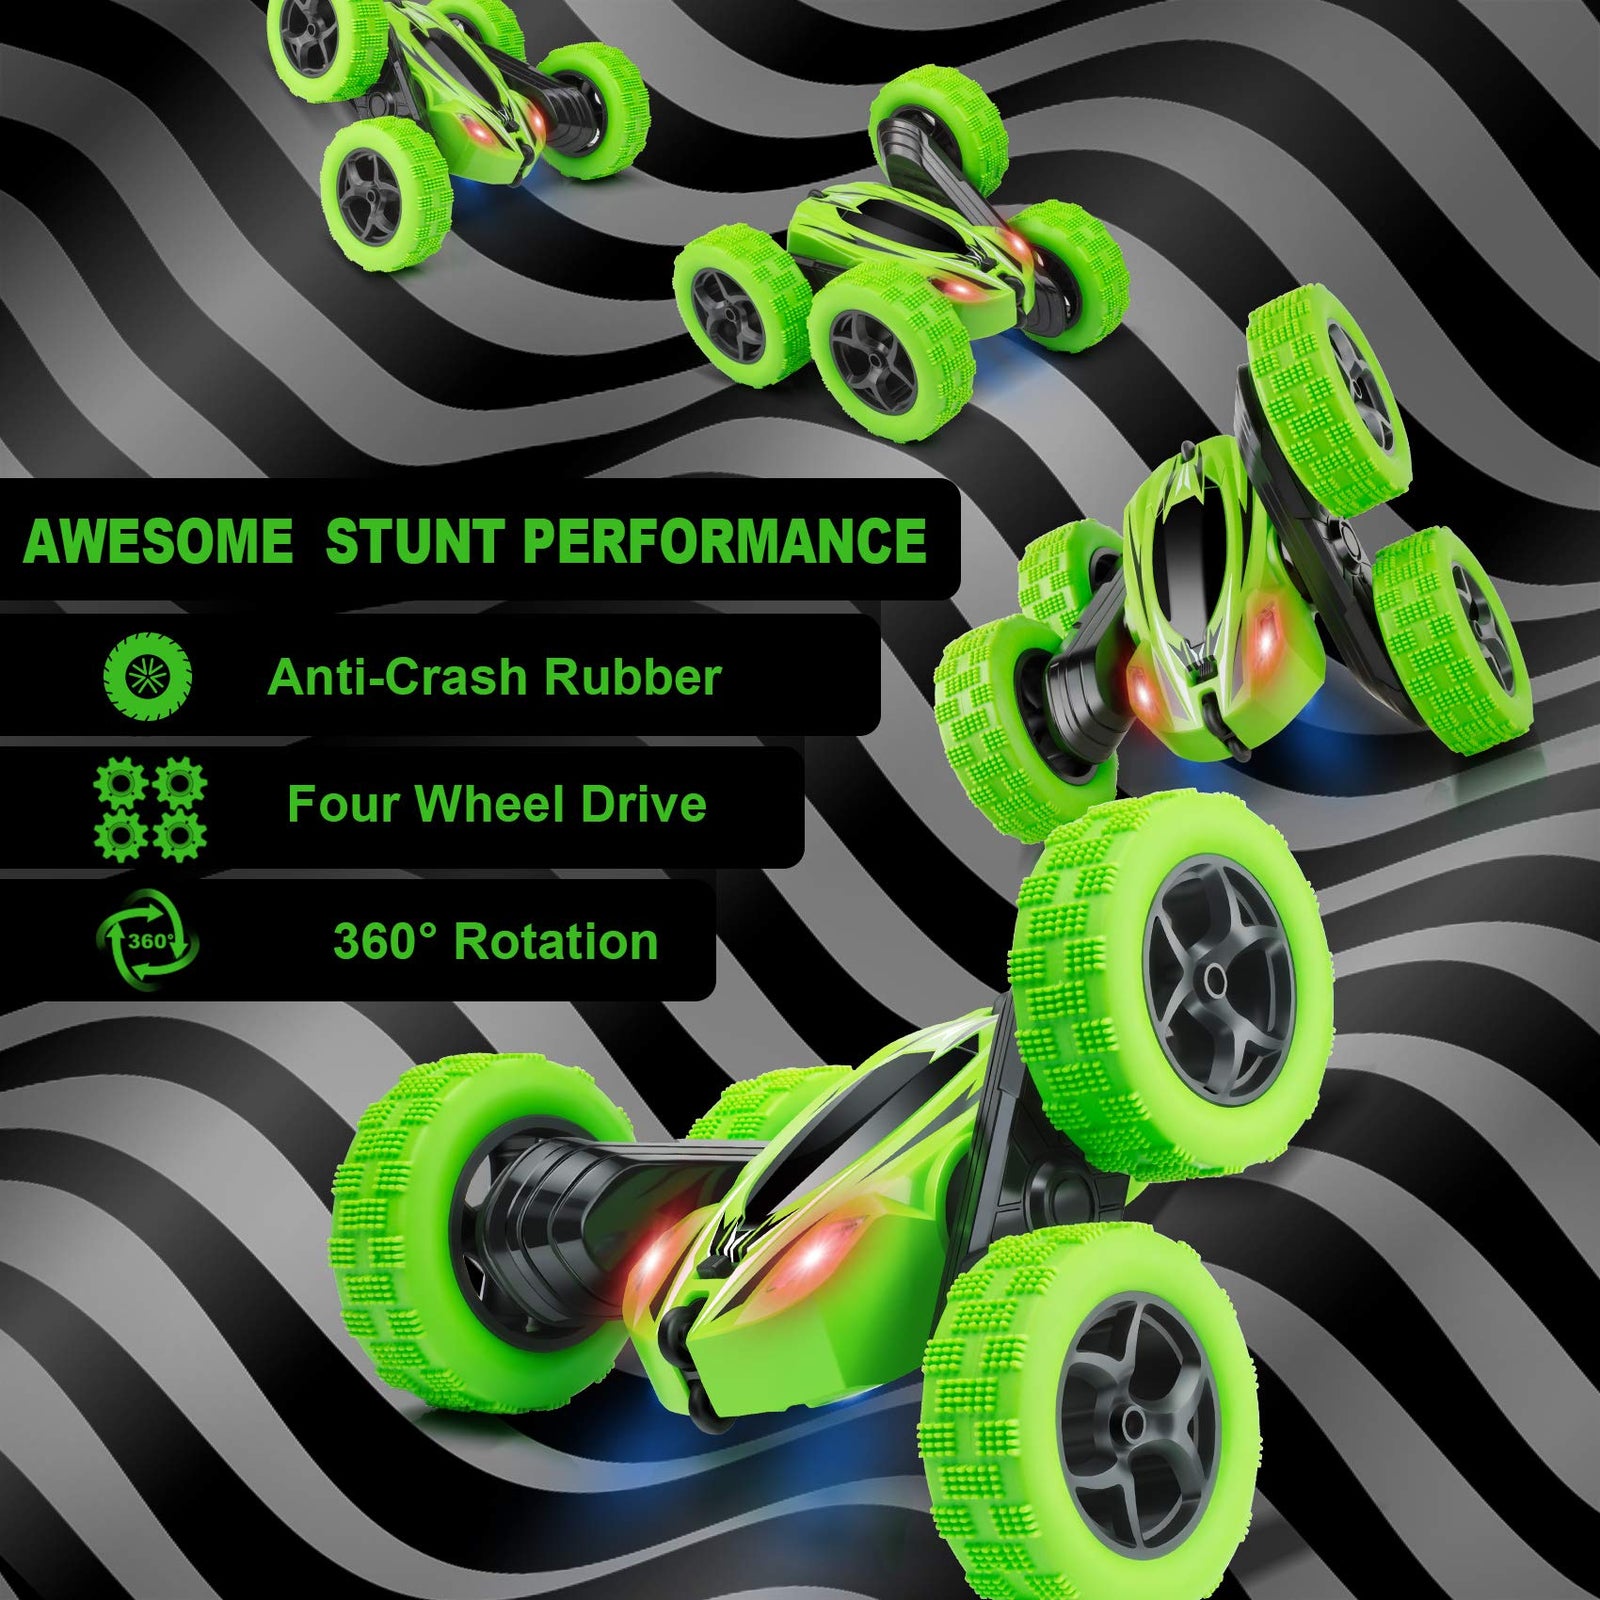 Remote Control Car, ORRENTE RC Cars Stunt Car Toy, 4WD 2.4Ghz Double Sided 360° Rotating RC Car with Headlights, Kids Xmas Toy Cars for Boys/Girls (Green)